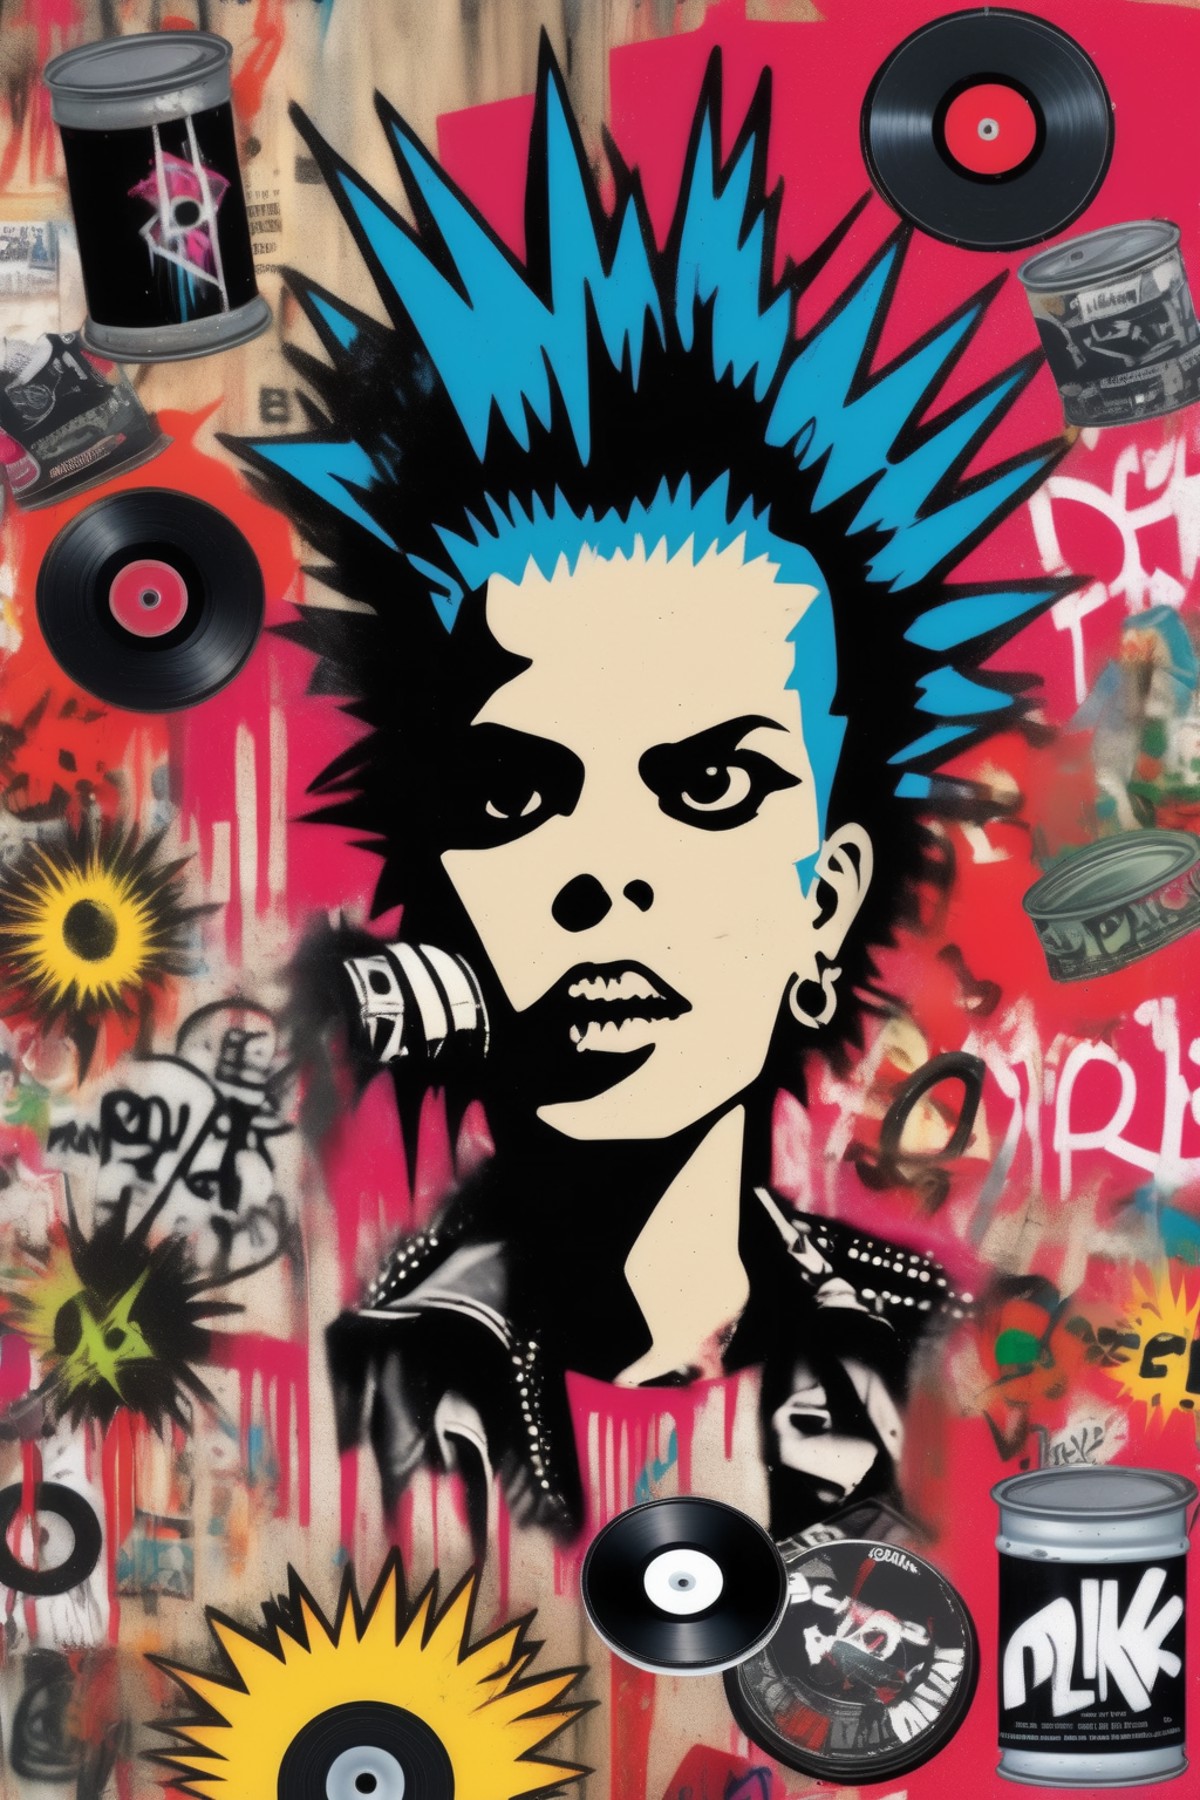 <lora:Punk Collage:1>Punk Collage - graffiti style iconic punk elements, such as spiked bracelets, vinyl records, and spra...